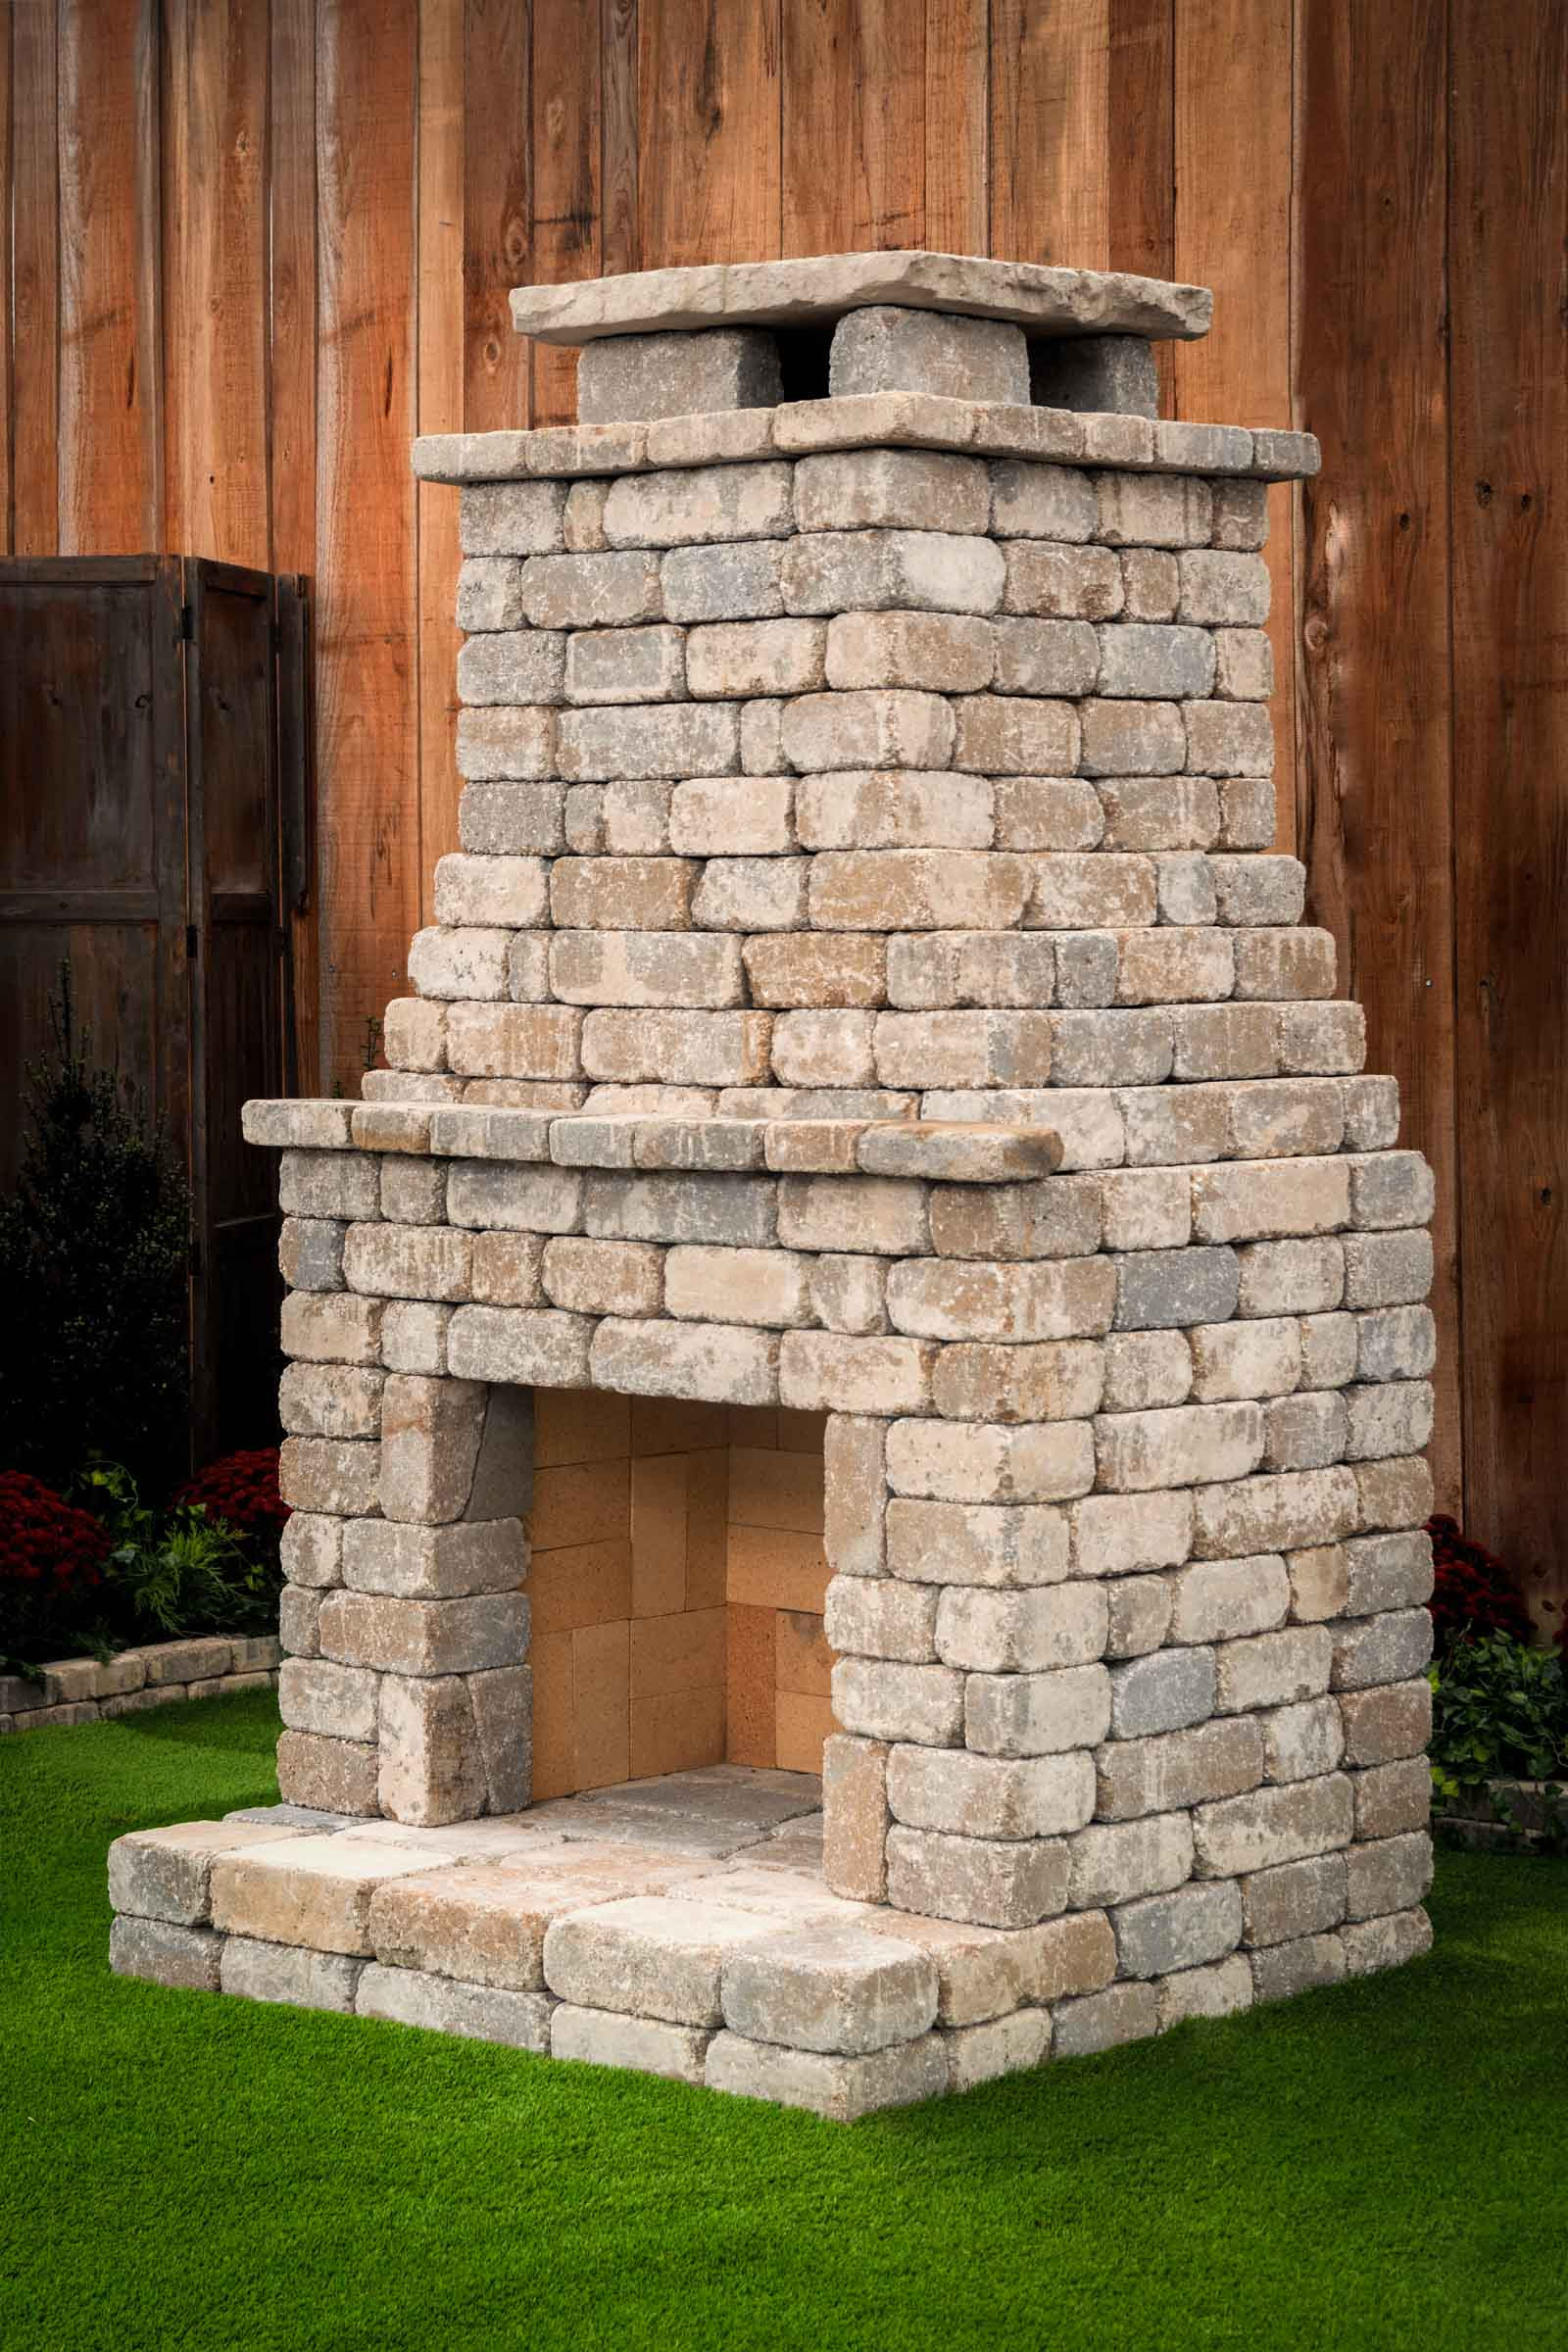 DIY Outdoor Brick Fireplace
 DIY outdoor Fremont fireplace kit makes hardscaping simple